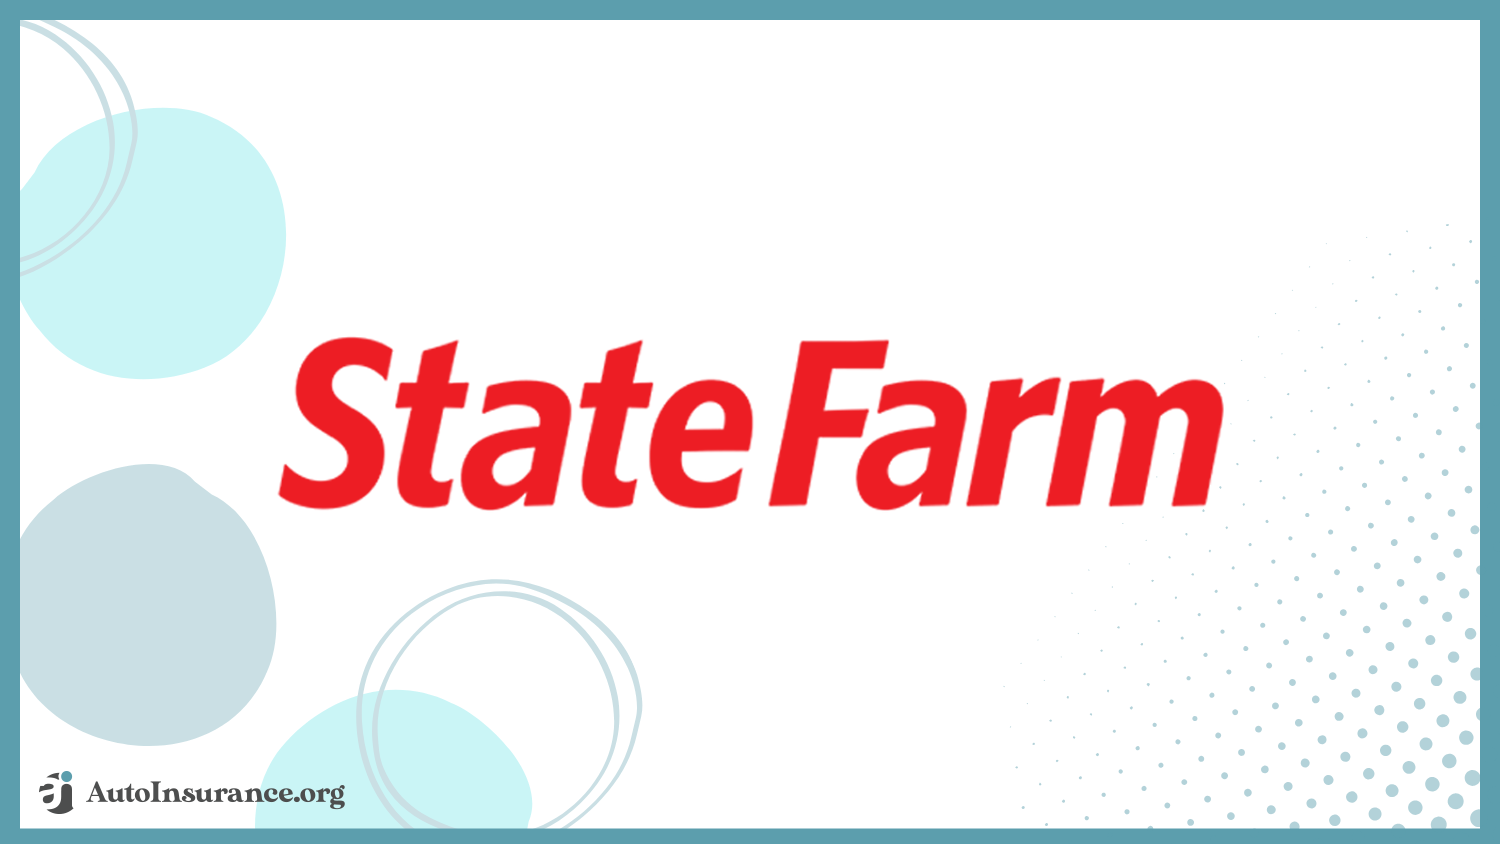 State Farm: Cheap Auto Insurance for Occasional Drivers